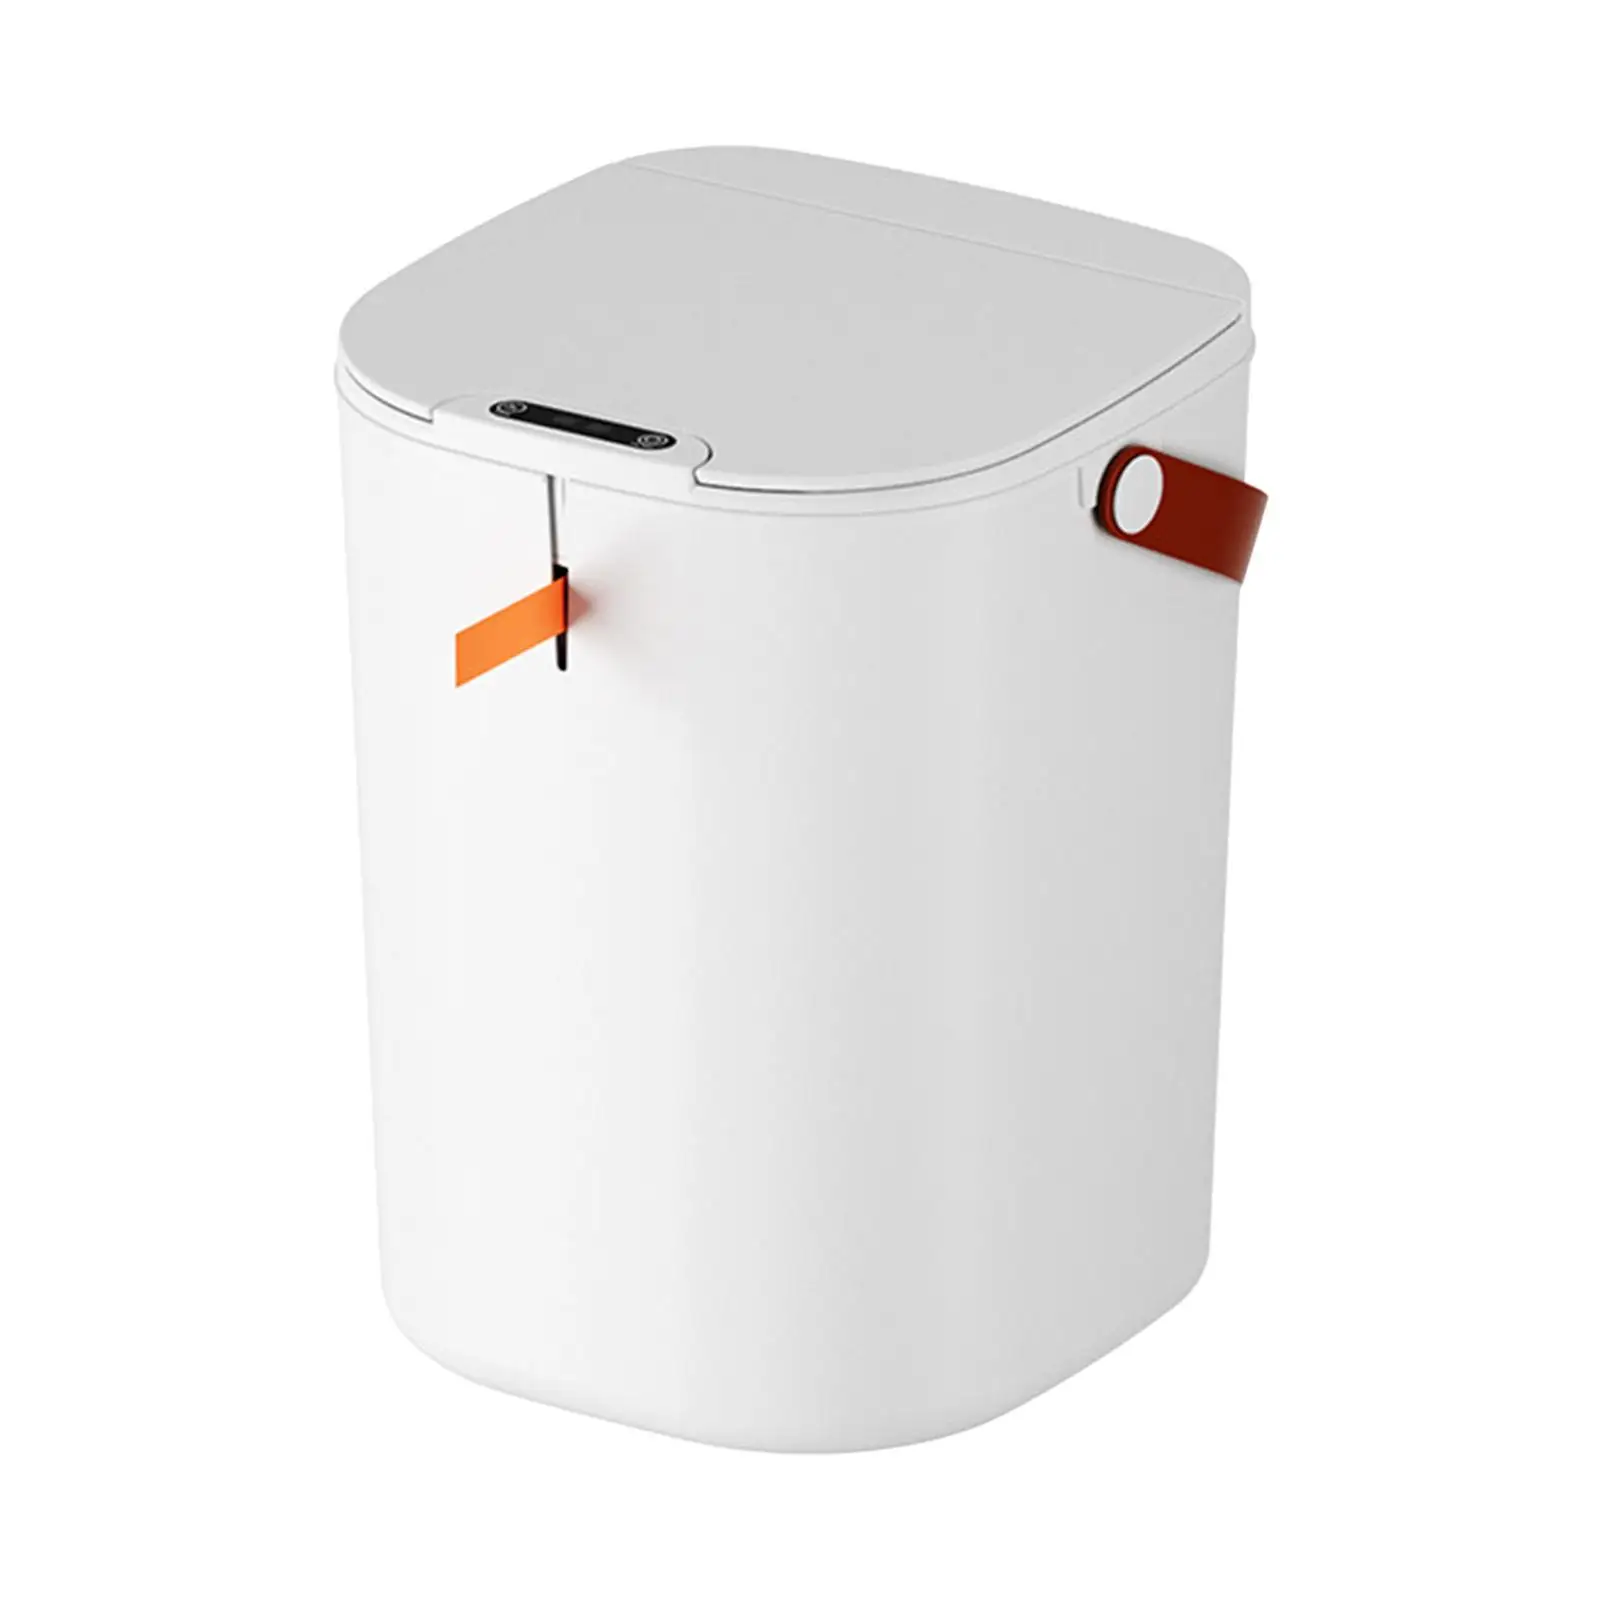 Touchless Trash Can Electric Garbage Bin Automatic Garbage Can Smart Trash Can for Office Laundry Living Room Bathroom